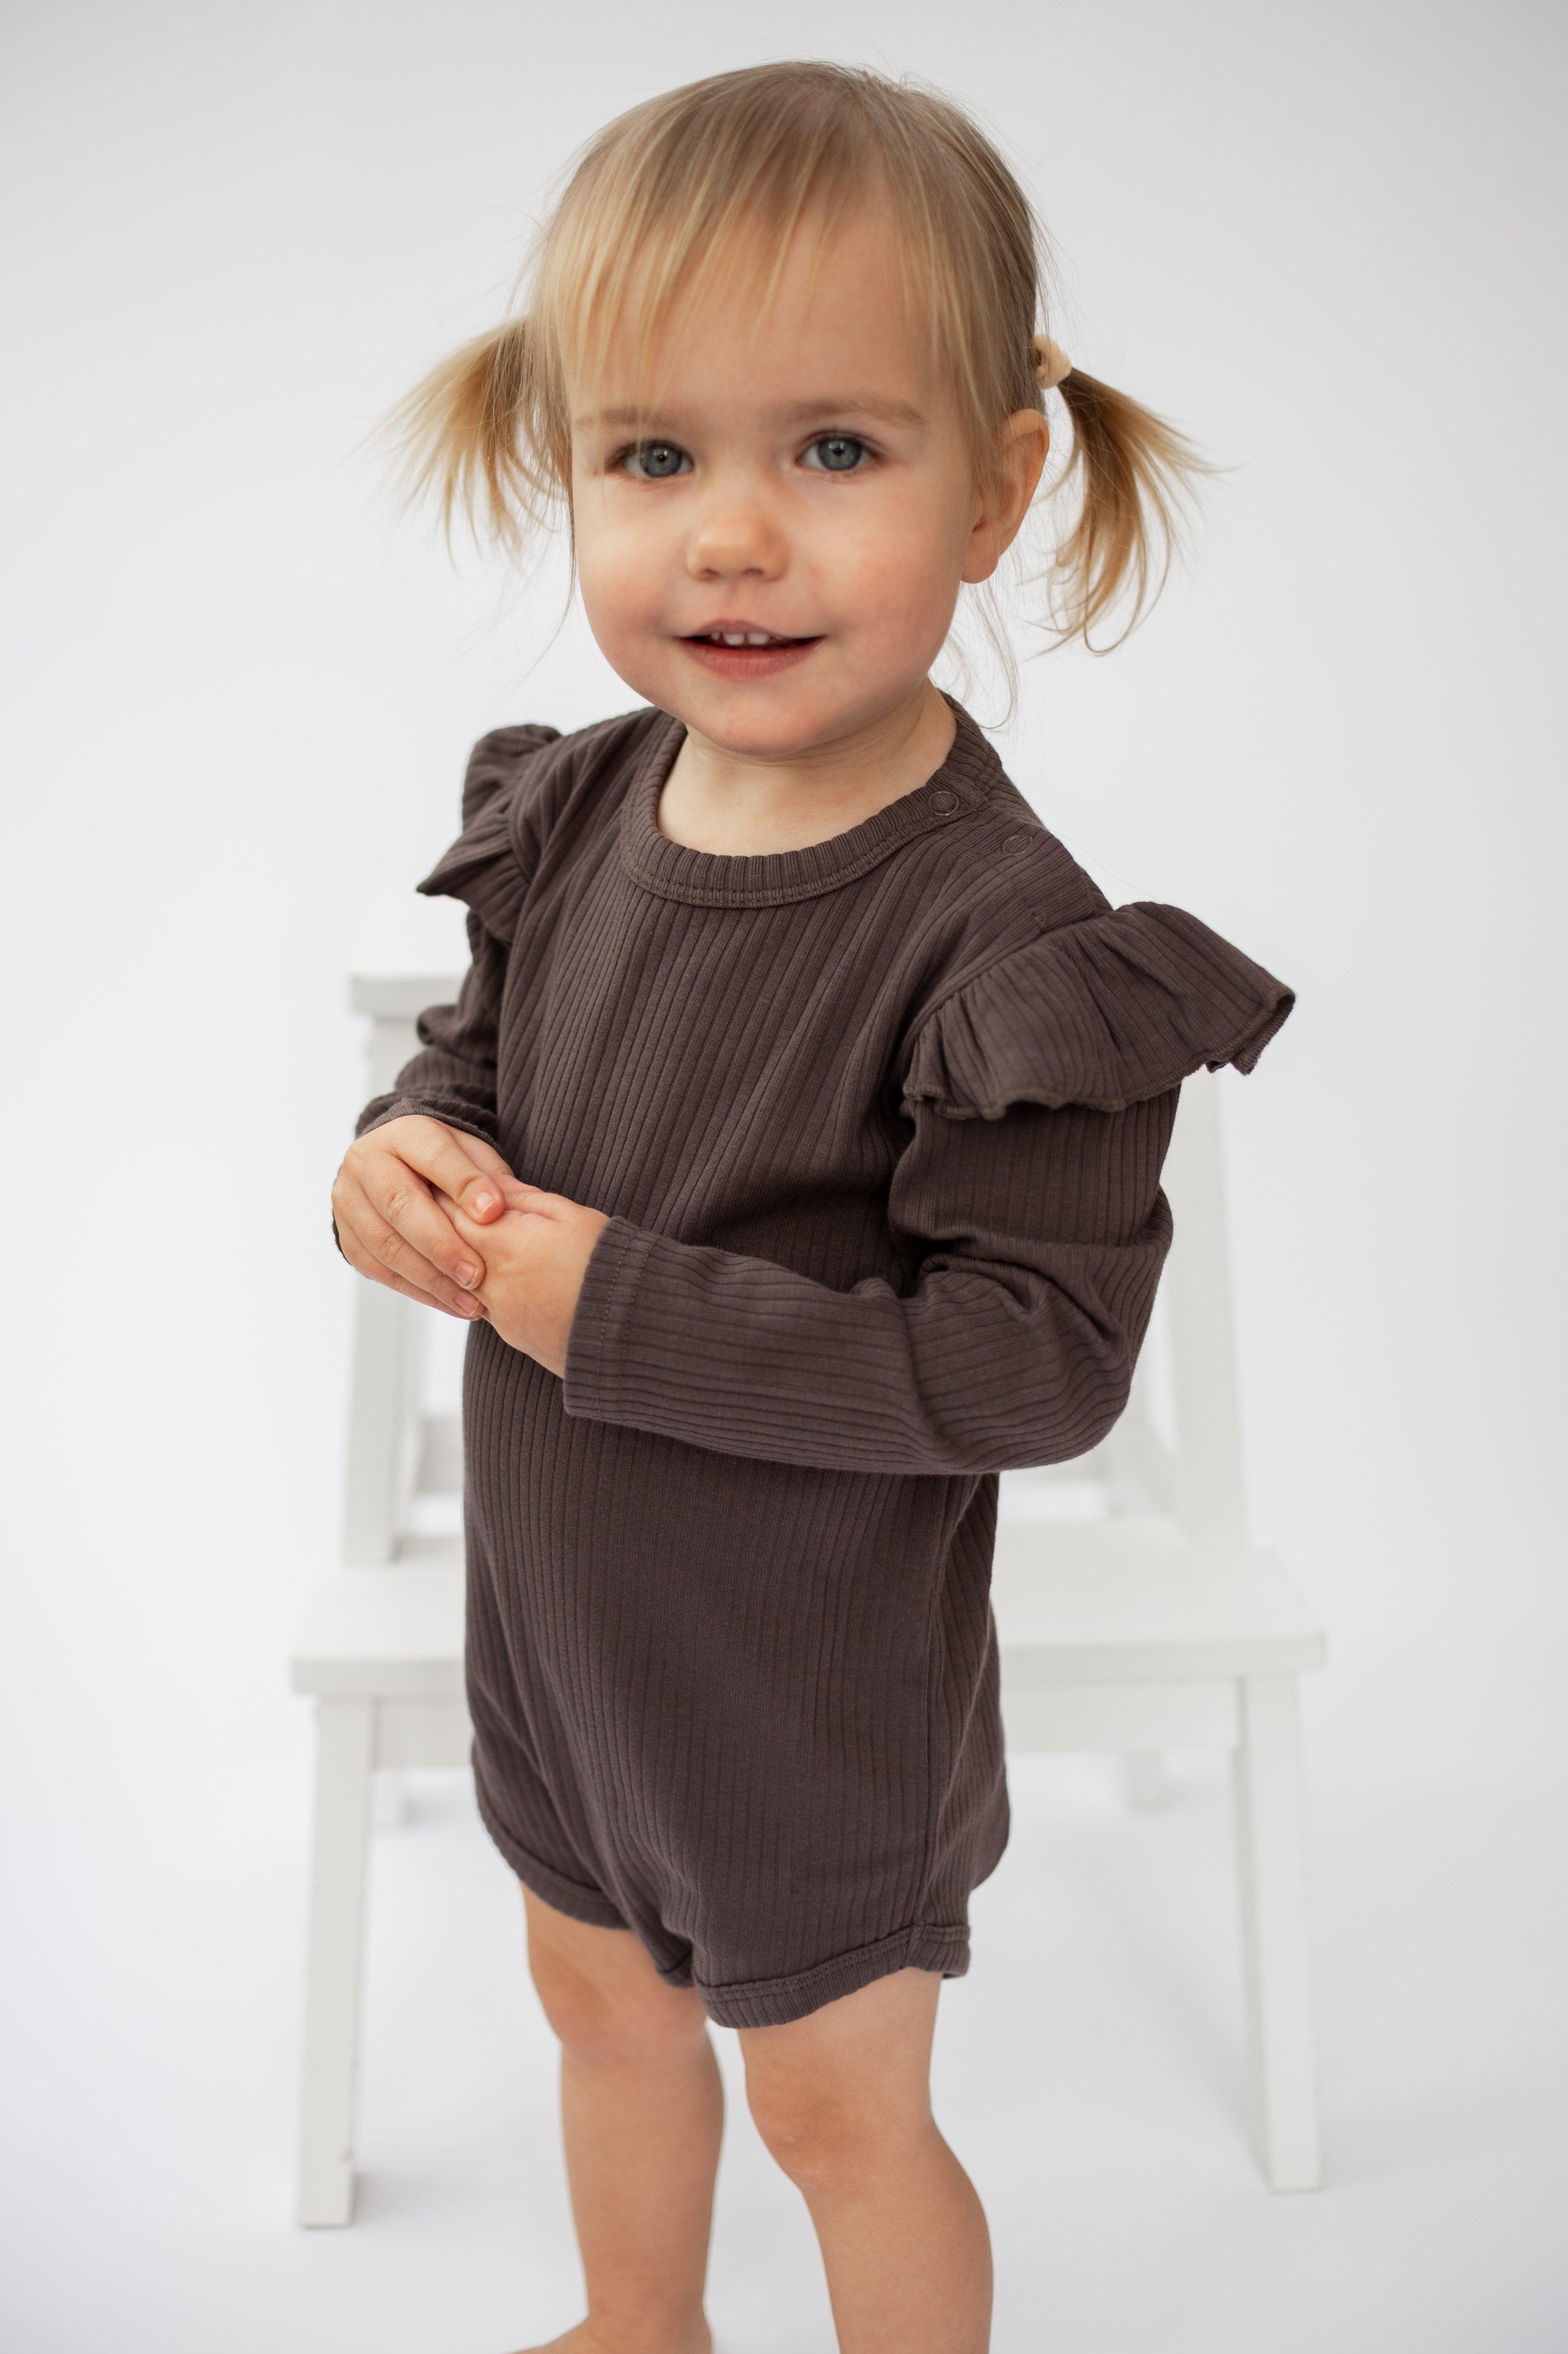 files/charcoal-greybrown-frill-long-sleeve-bodysuit-claybearofficial-4.jpg